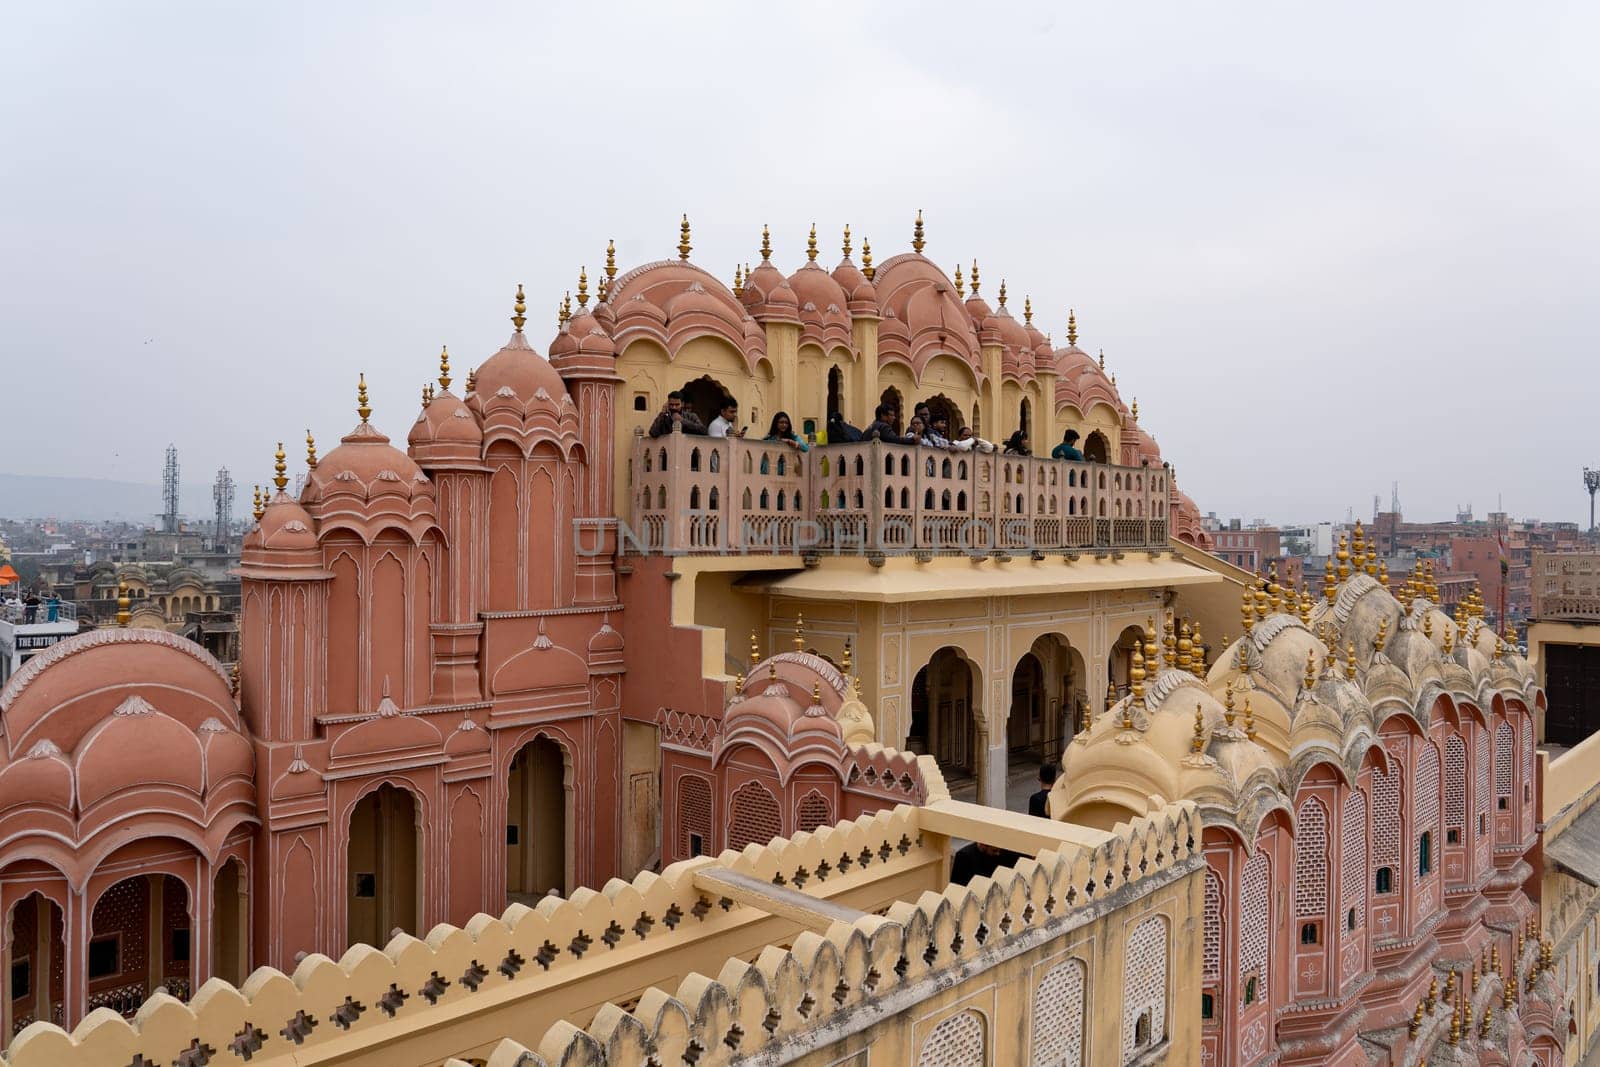 Jaipur, India - December 11, 2019: People at the beautiful Hawa Mahal, Palace of Winds in the pink city.